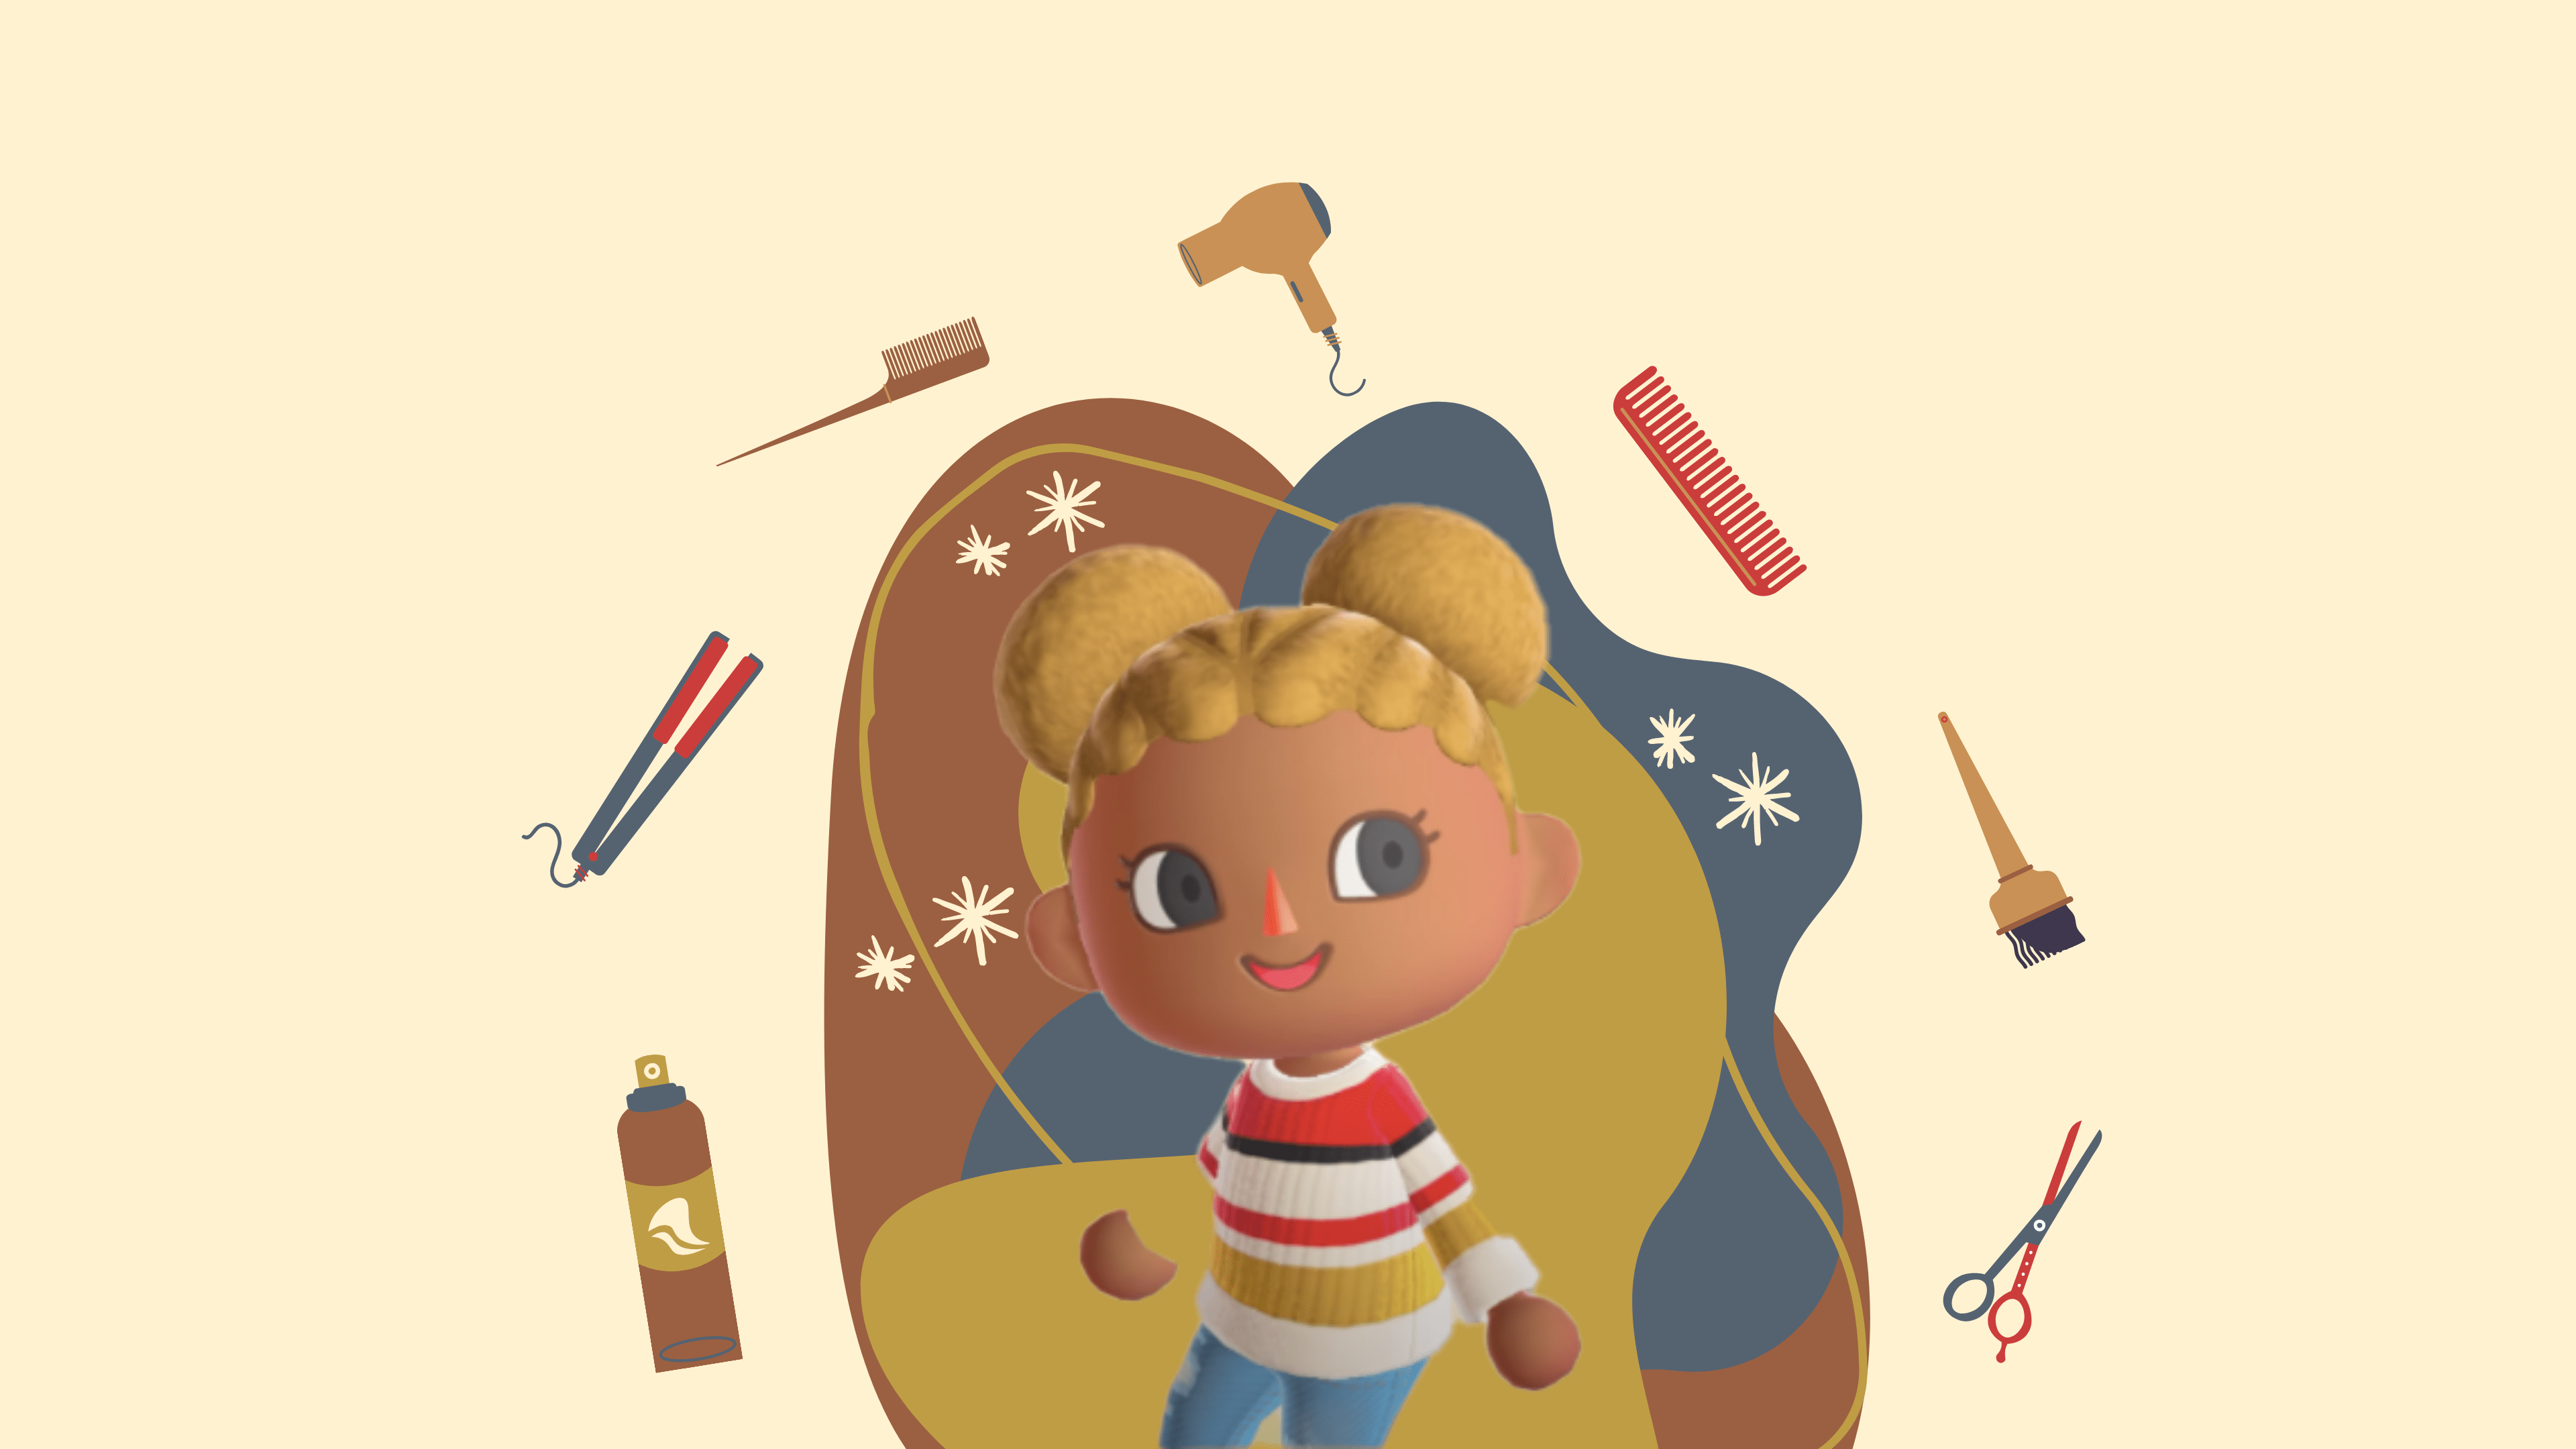 An "Animal Crossing" character is surrounded by hair tools.